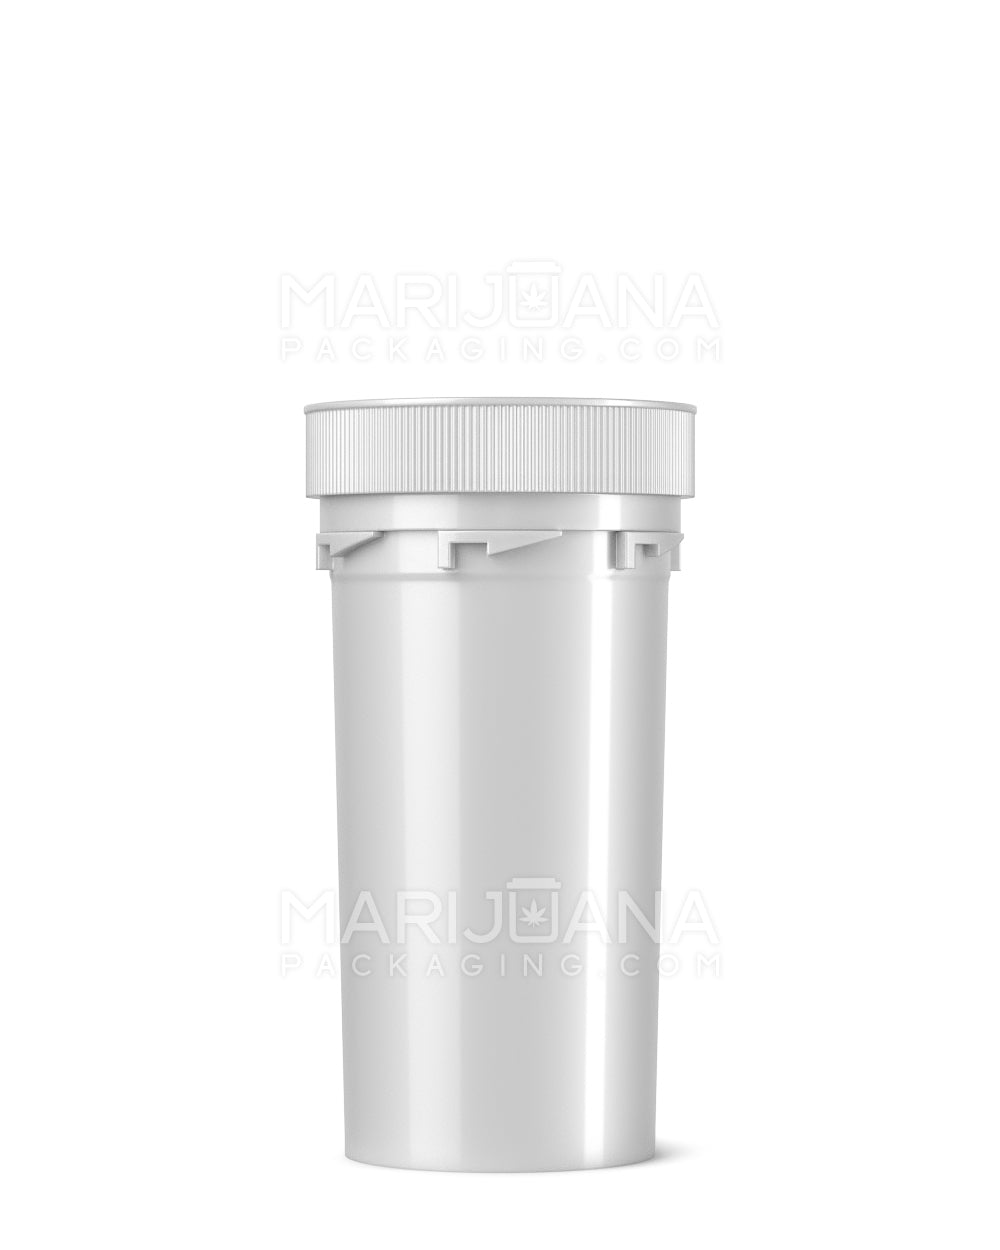 Child Resistant | Opaque Silver Blank Reversible Cap Vials | 40dr - 10g - 150 Count - 2